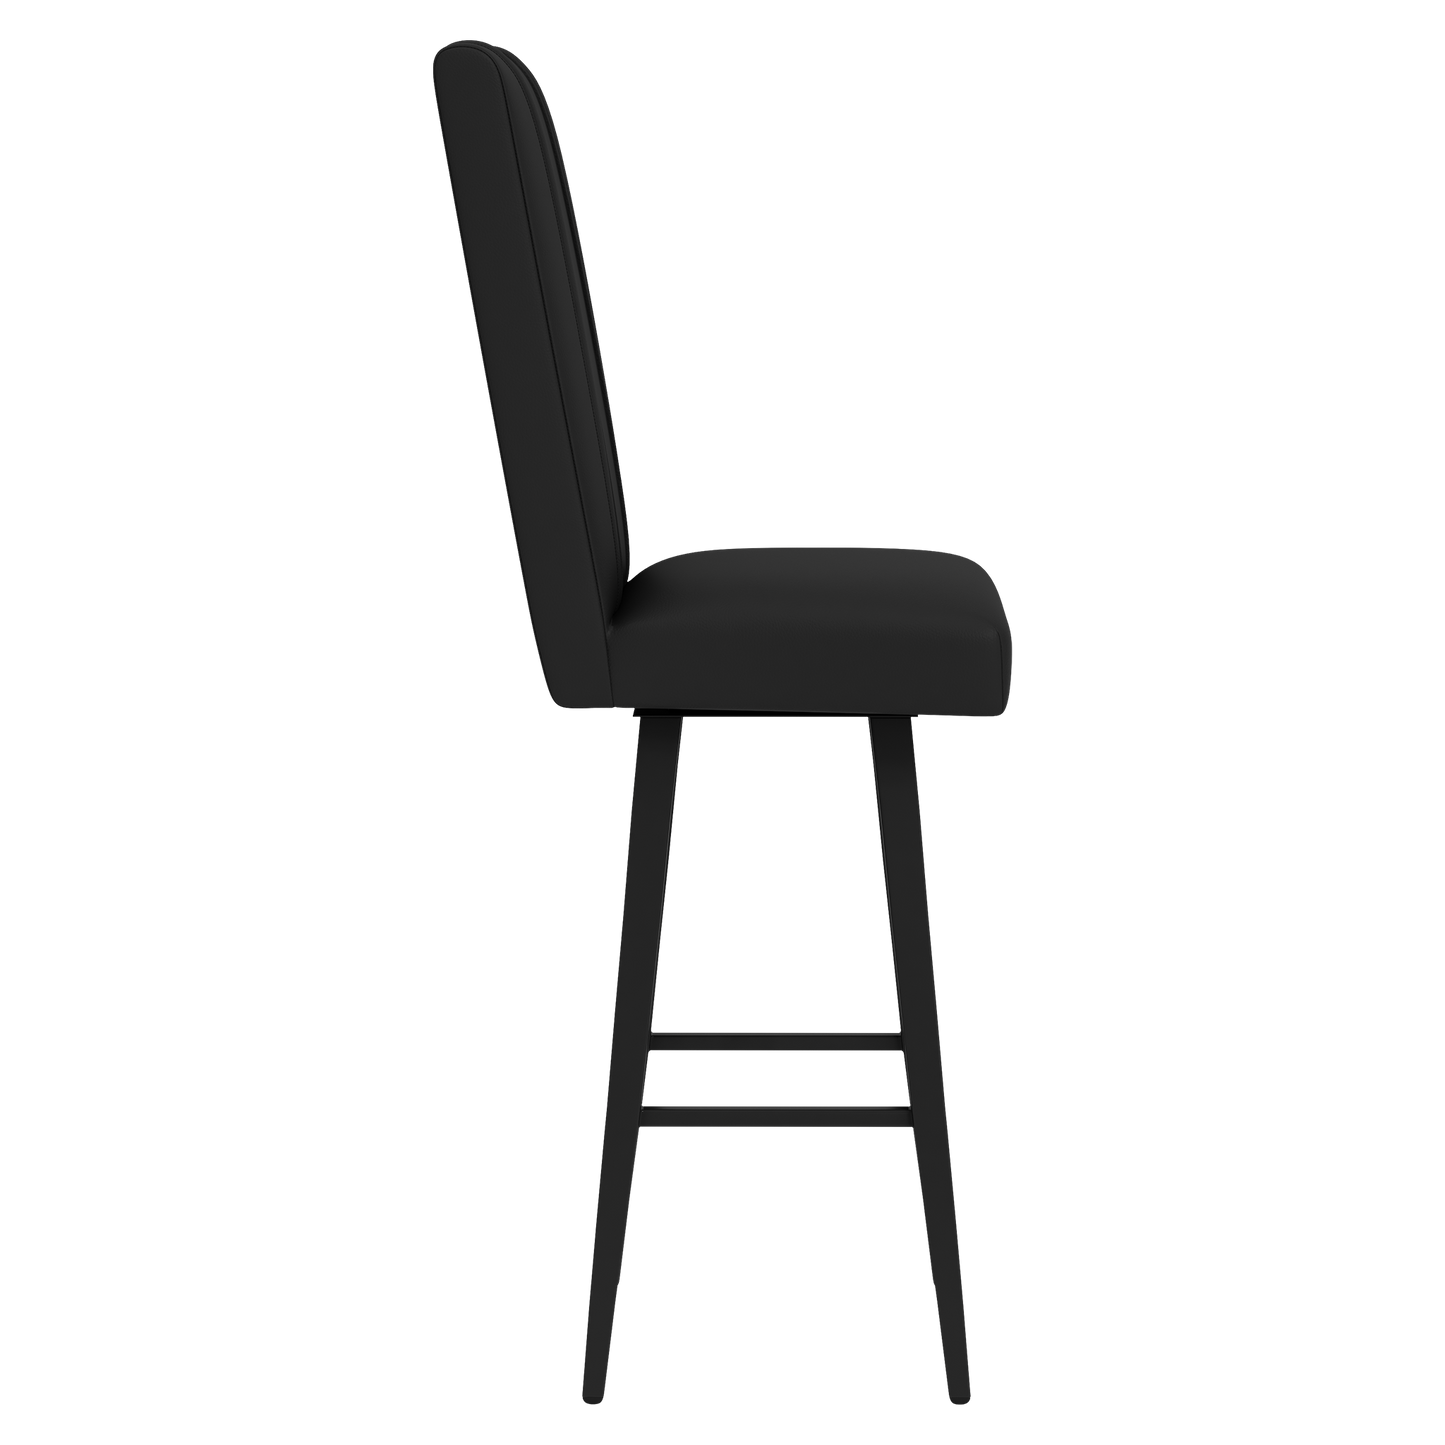 Swivel Bar Stool 2000 with Boston Red Sox Cooperstown Primary